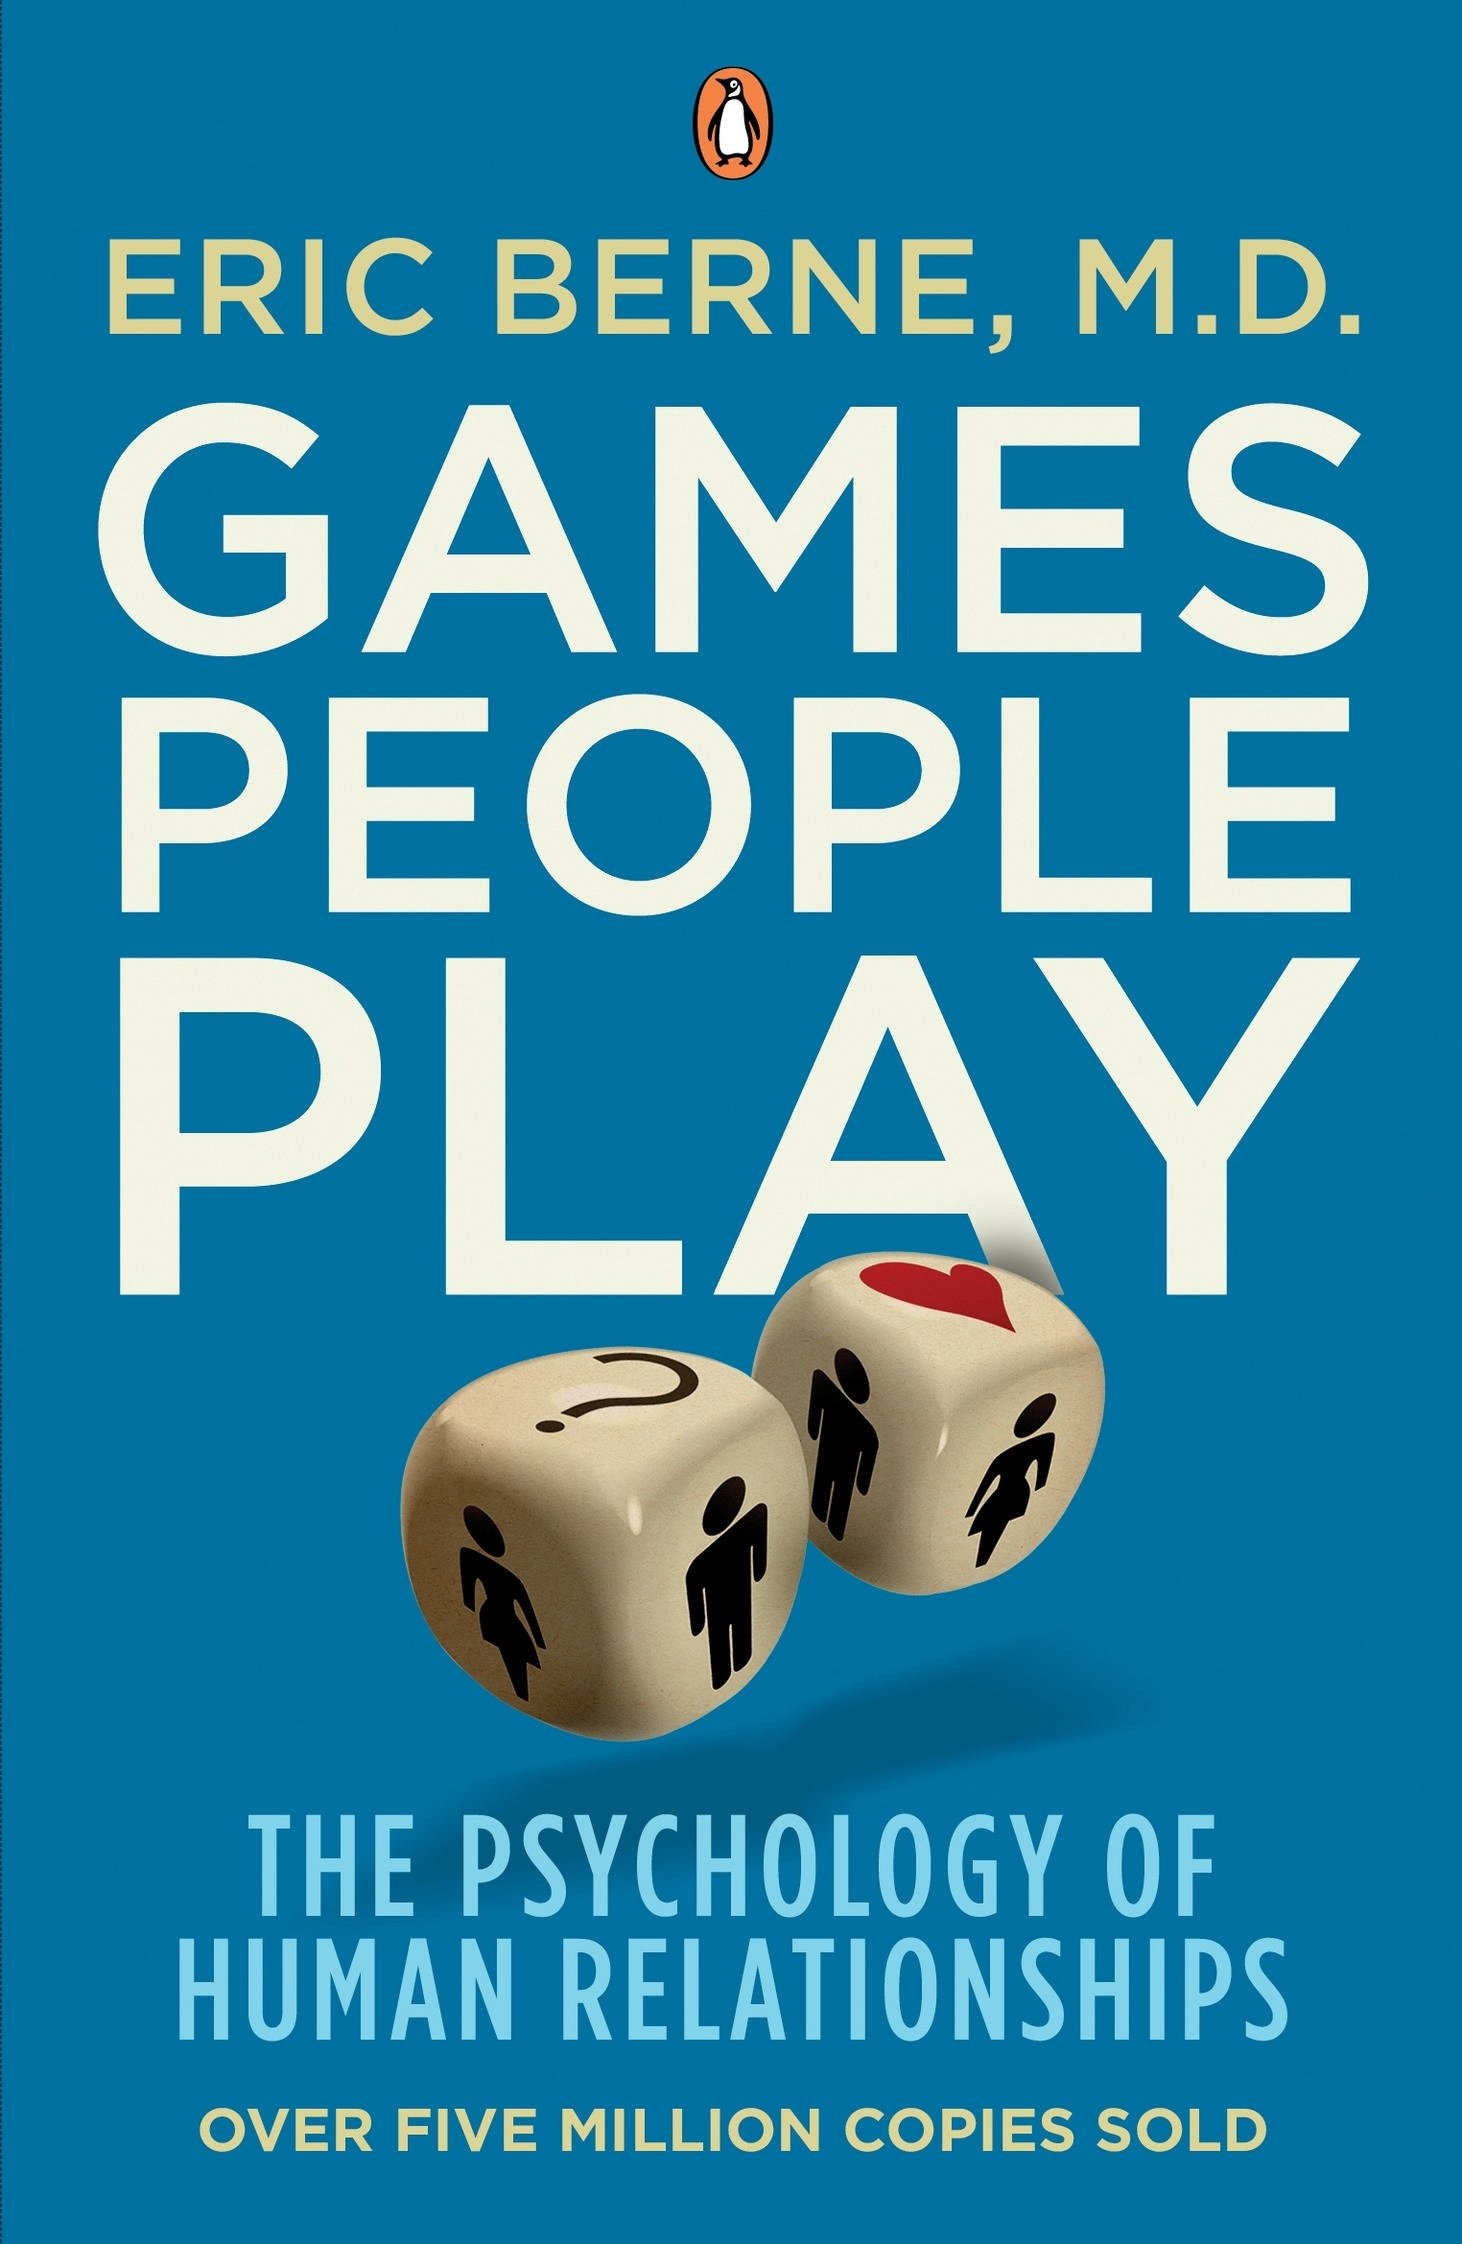 Games People Play book review by Eric Berne